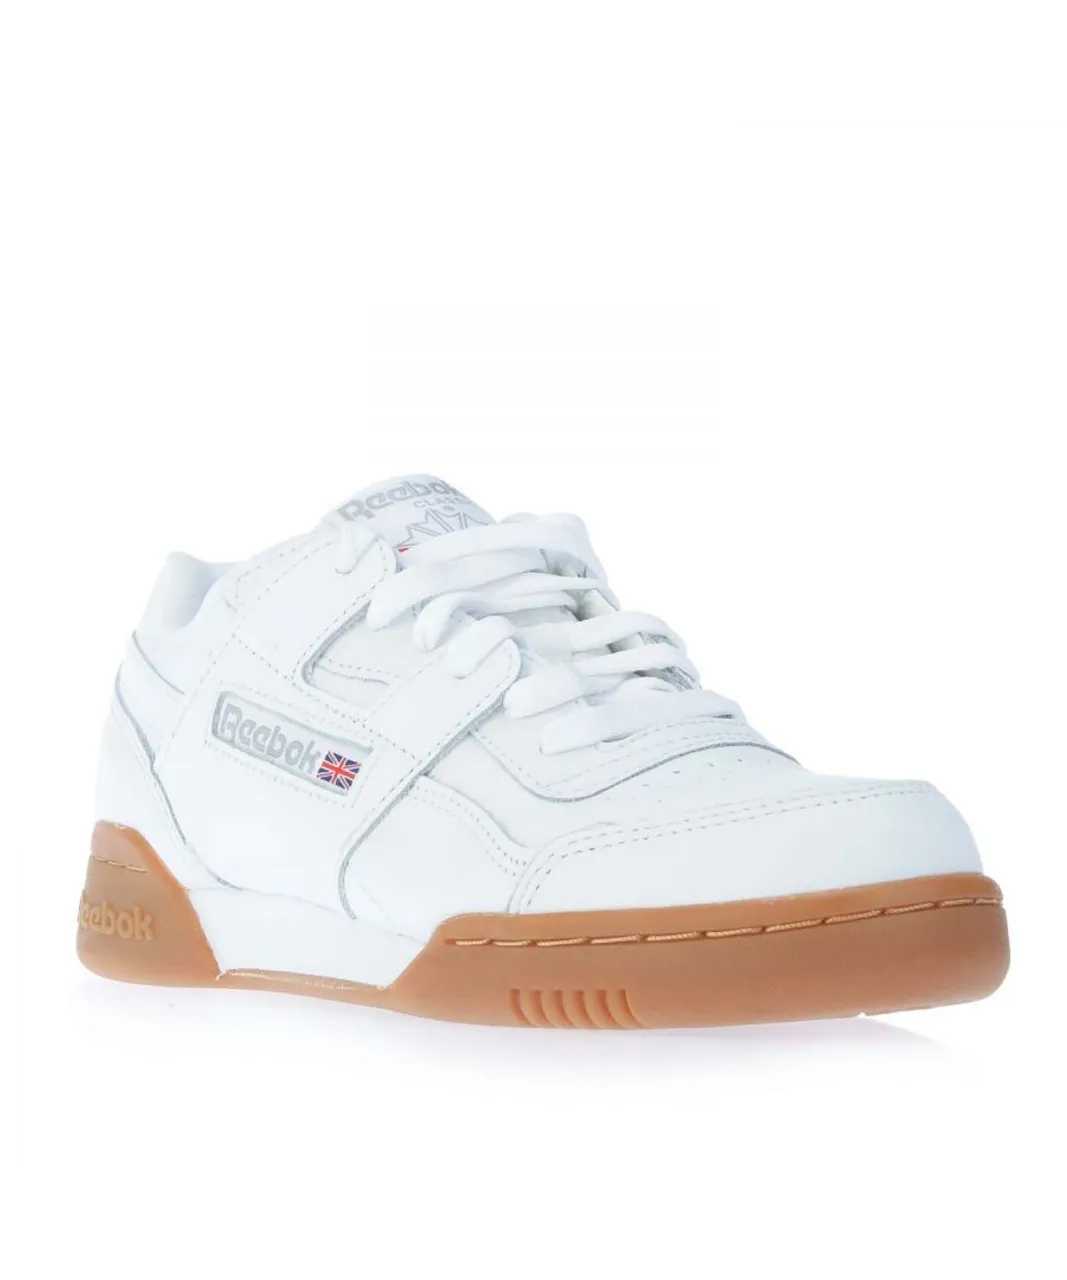 Reebok Mens Classics Workout Plus Trainers in White Leather (archived)